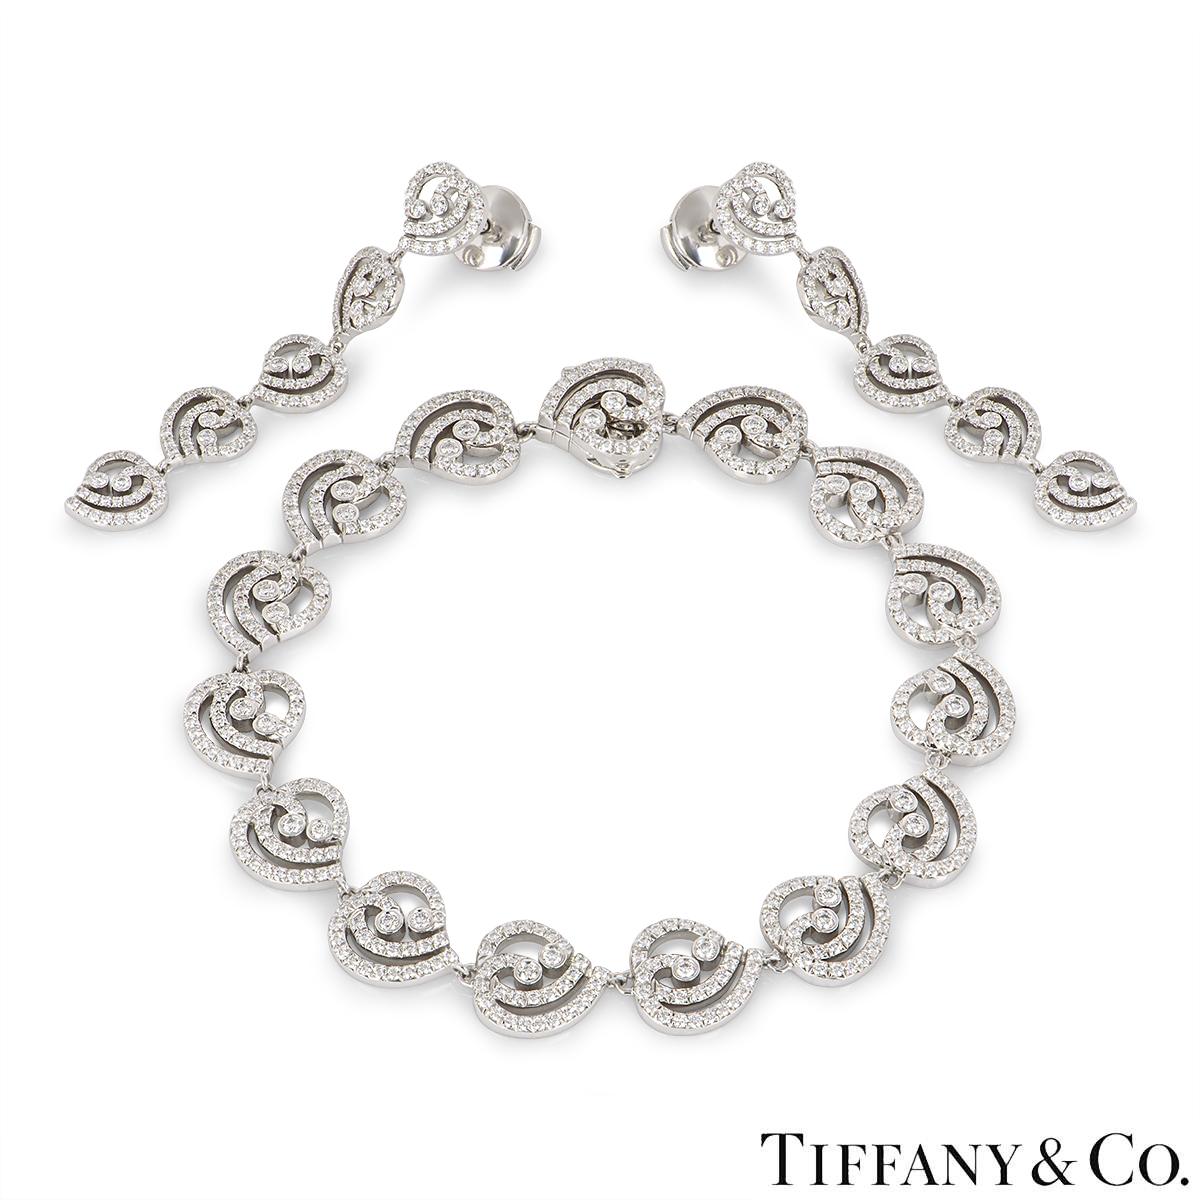 A scintillating platinum diamond jewellery suite from Tiffany & Co. The earrings and bracelet feature a swirl design pave set with round brilliant cut diamonds with a combined approximate weight of 3.35ct. The earrings measure 1.75 inches long and